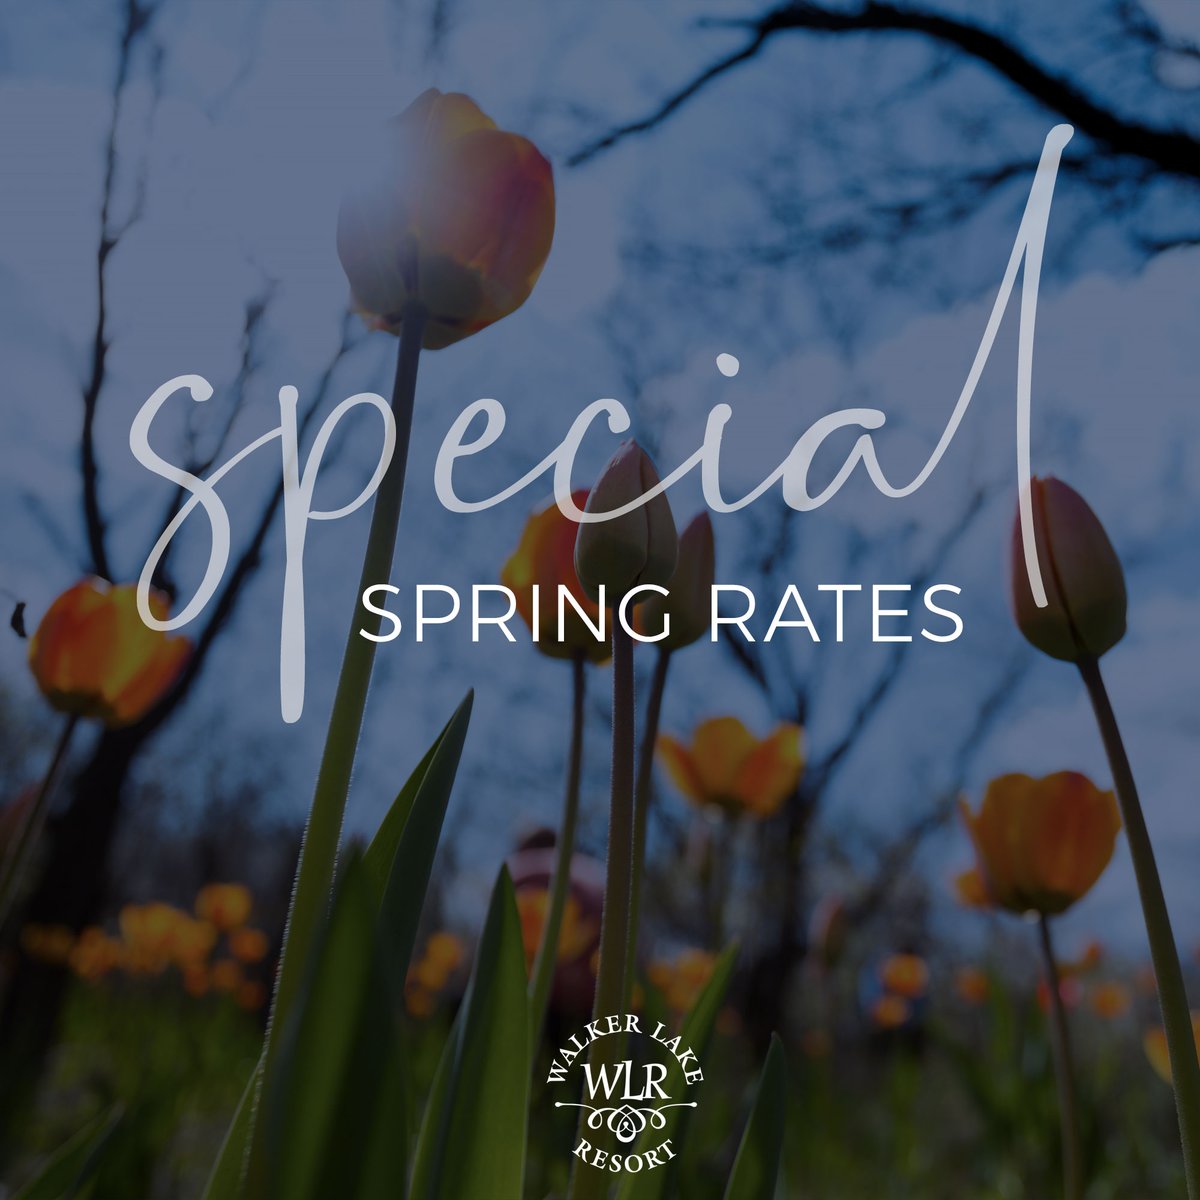 For a limited time we are offering SPECIAL SPRING RATES on bookings throughout May and June (while availability lasts). Find out more > info@walkerlakeresort.com #springtime #springishere #springrates #walkerlakeresort #muskoka #walkerlake #huntsvilleontario